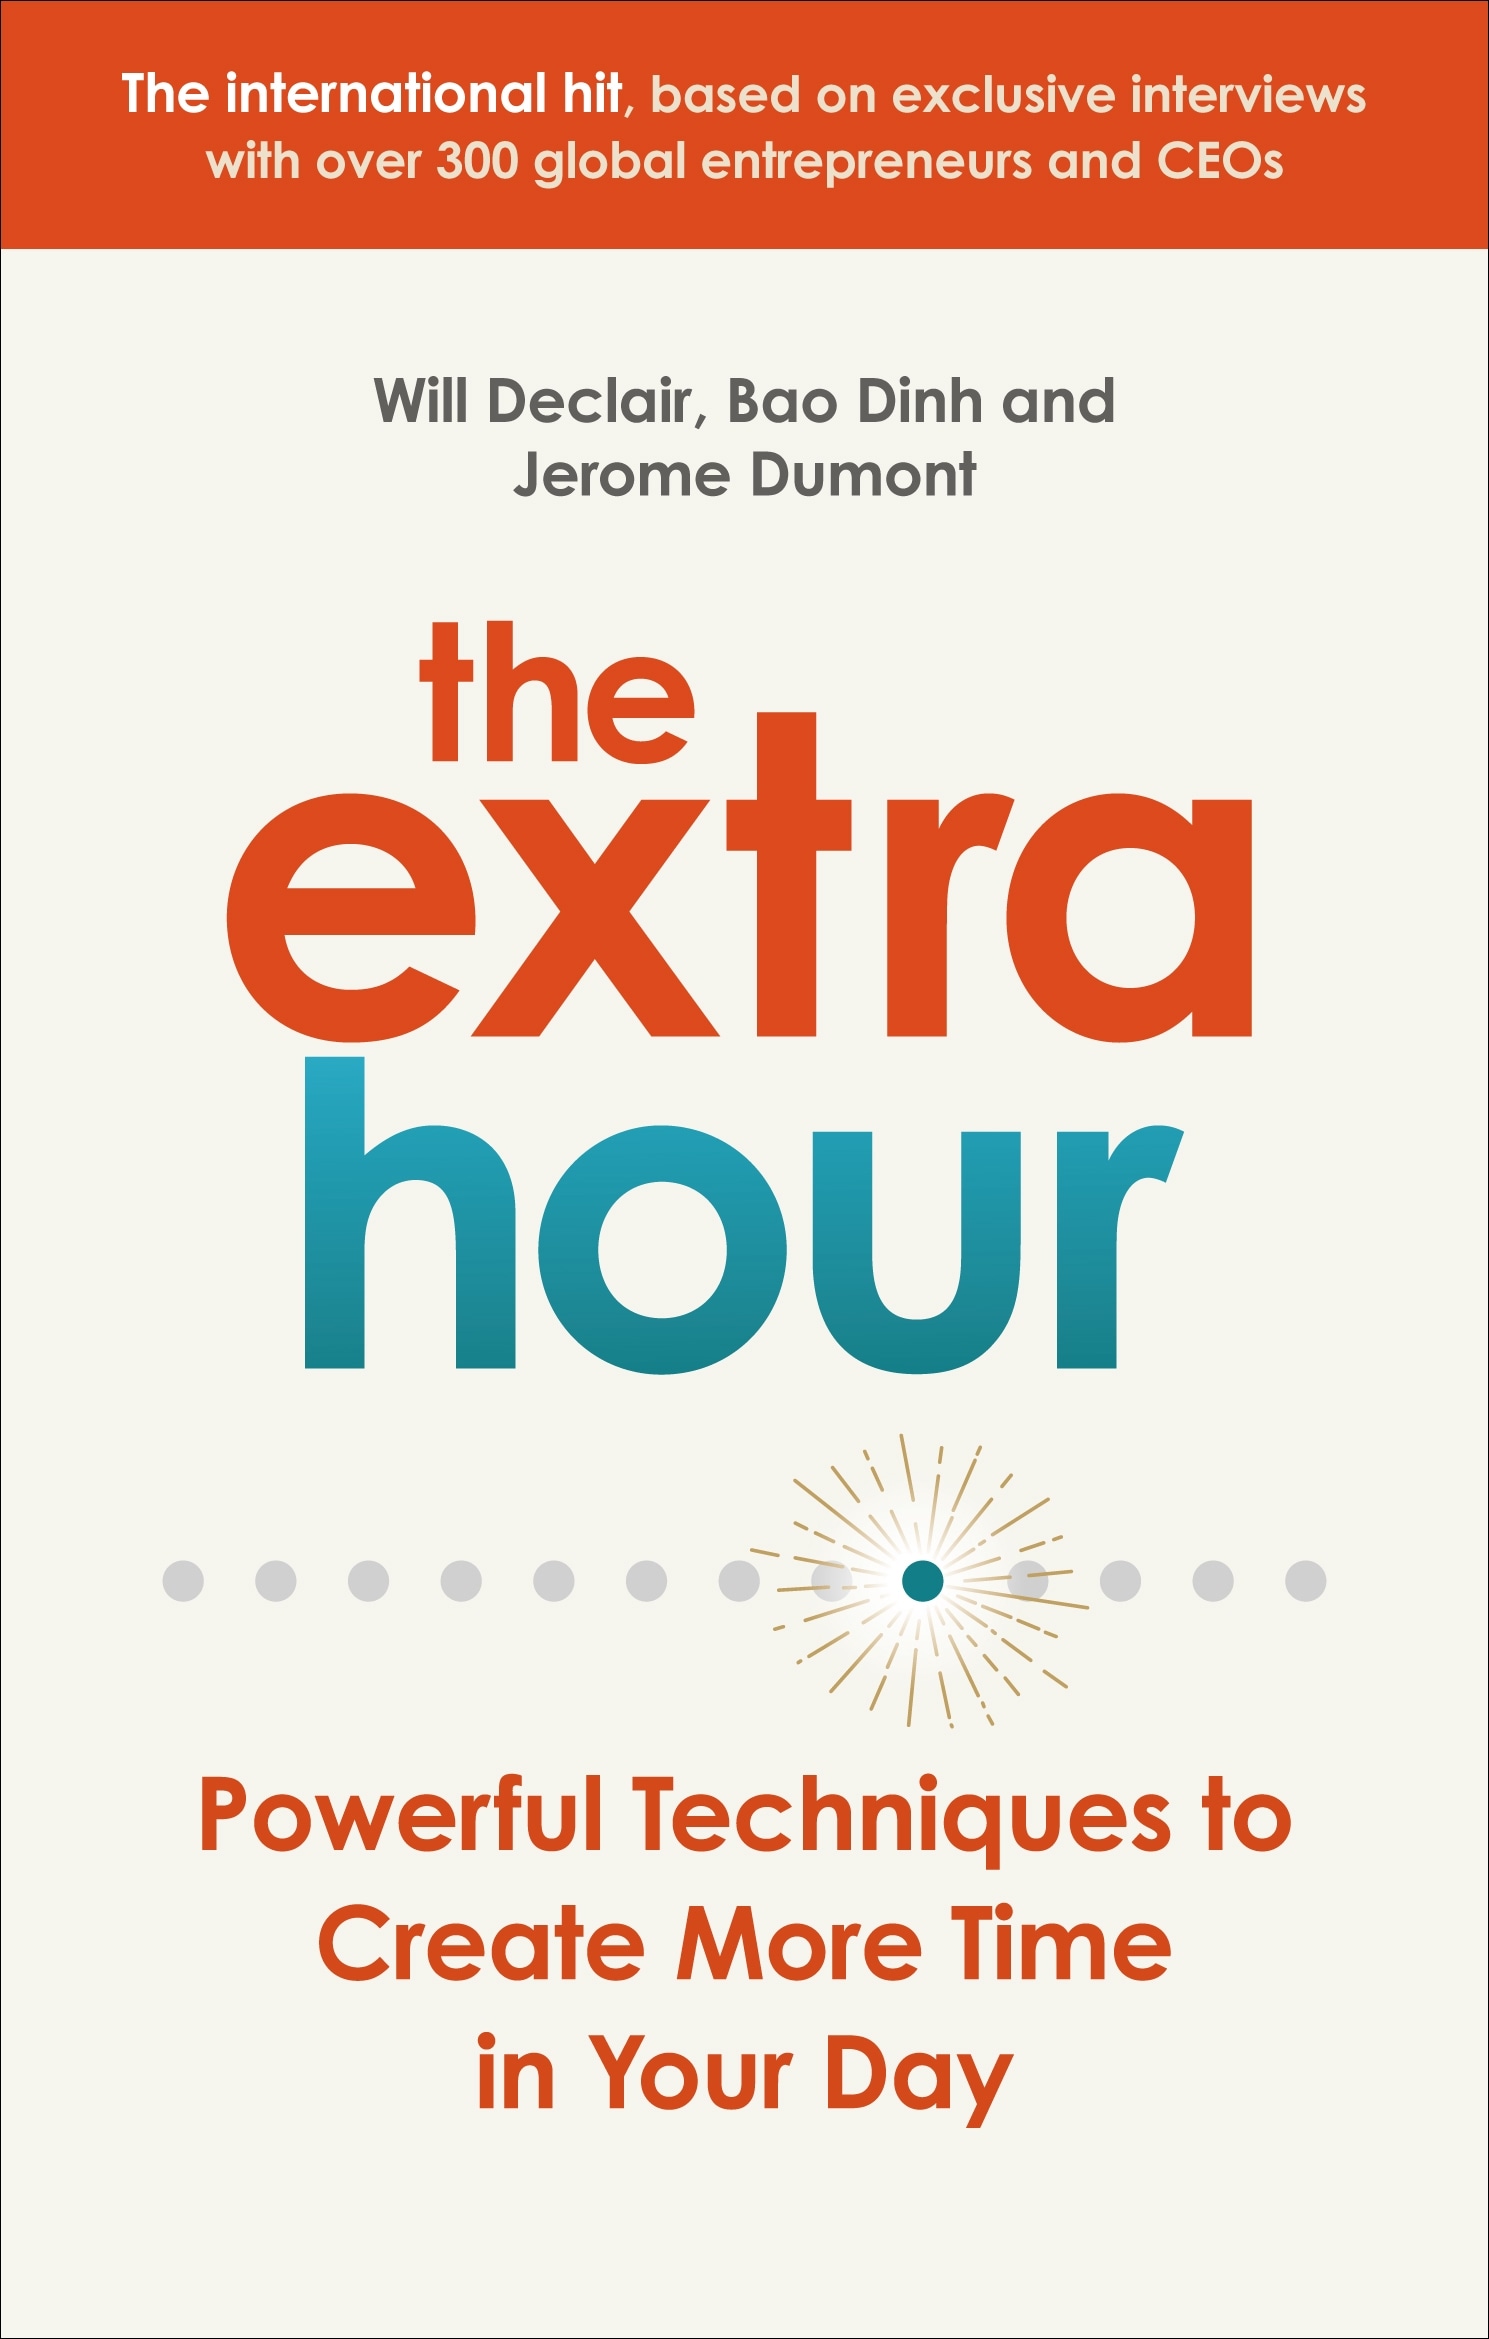 Book “The Extra Hour” by Will Declair — August 20, 2020